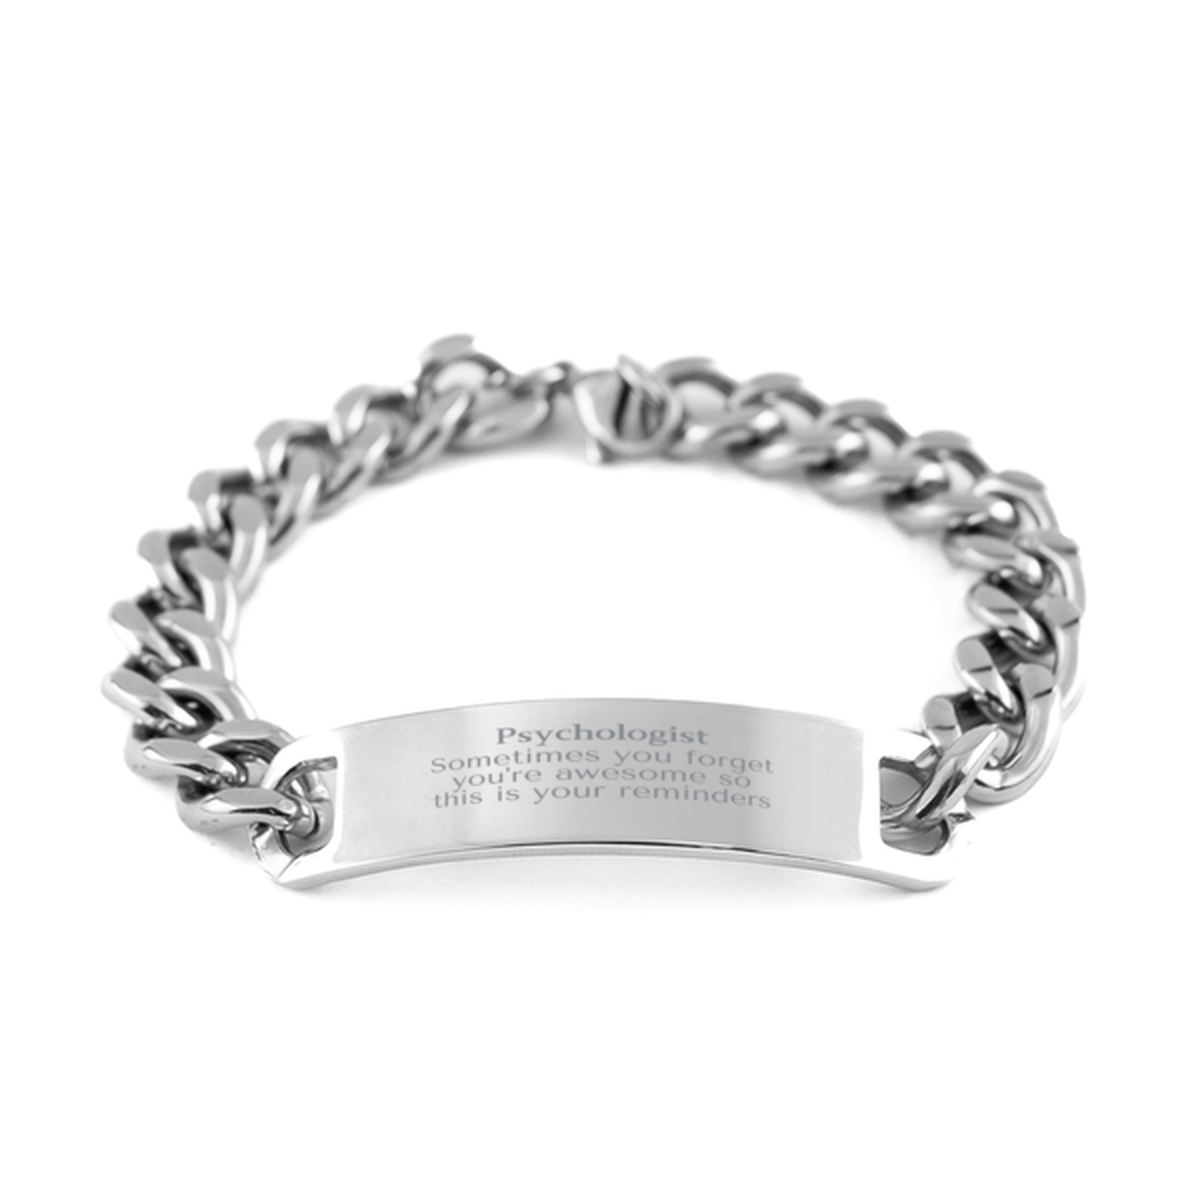 Sentimental Psychologist Cuban Chain Stainless Steel Bracelet, Psychologist Sometimes you forget you're awesome so this is your reminders, Graduation Christmas Birthday Gifts for Psychologist, Men, Women, Coworkers